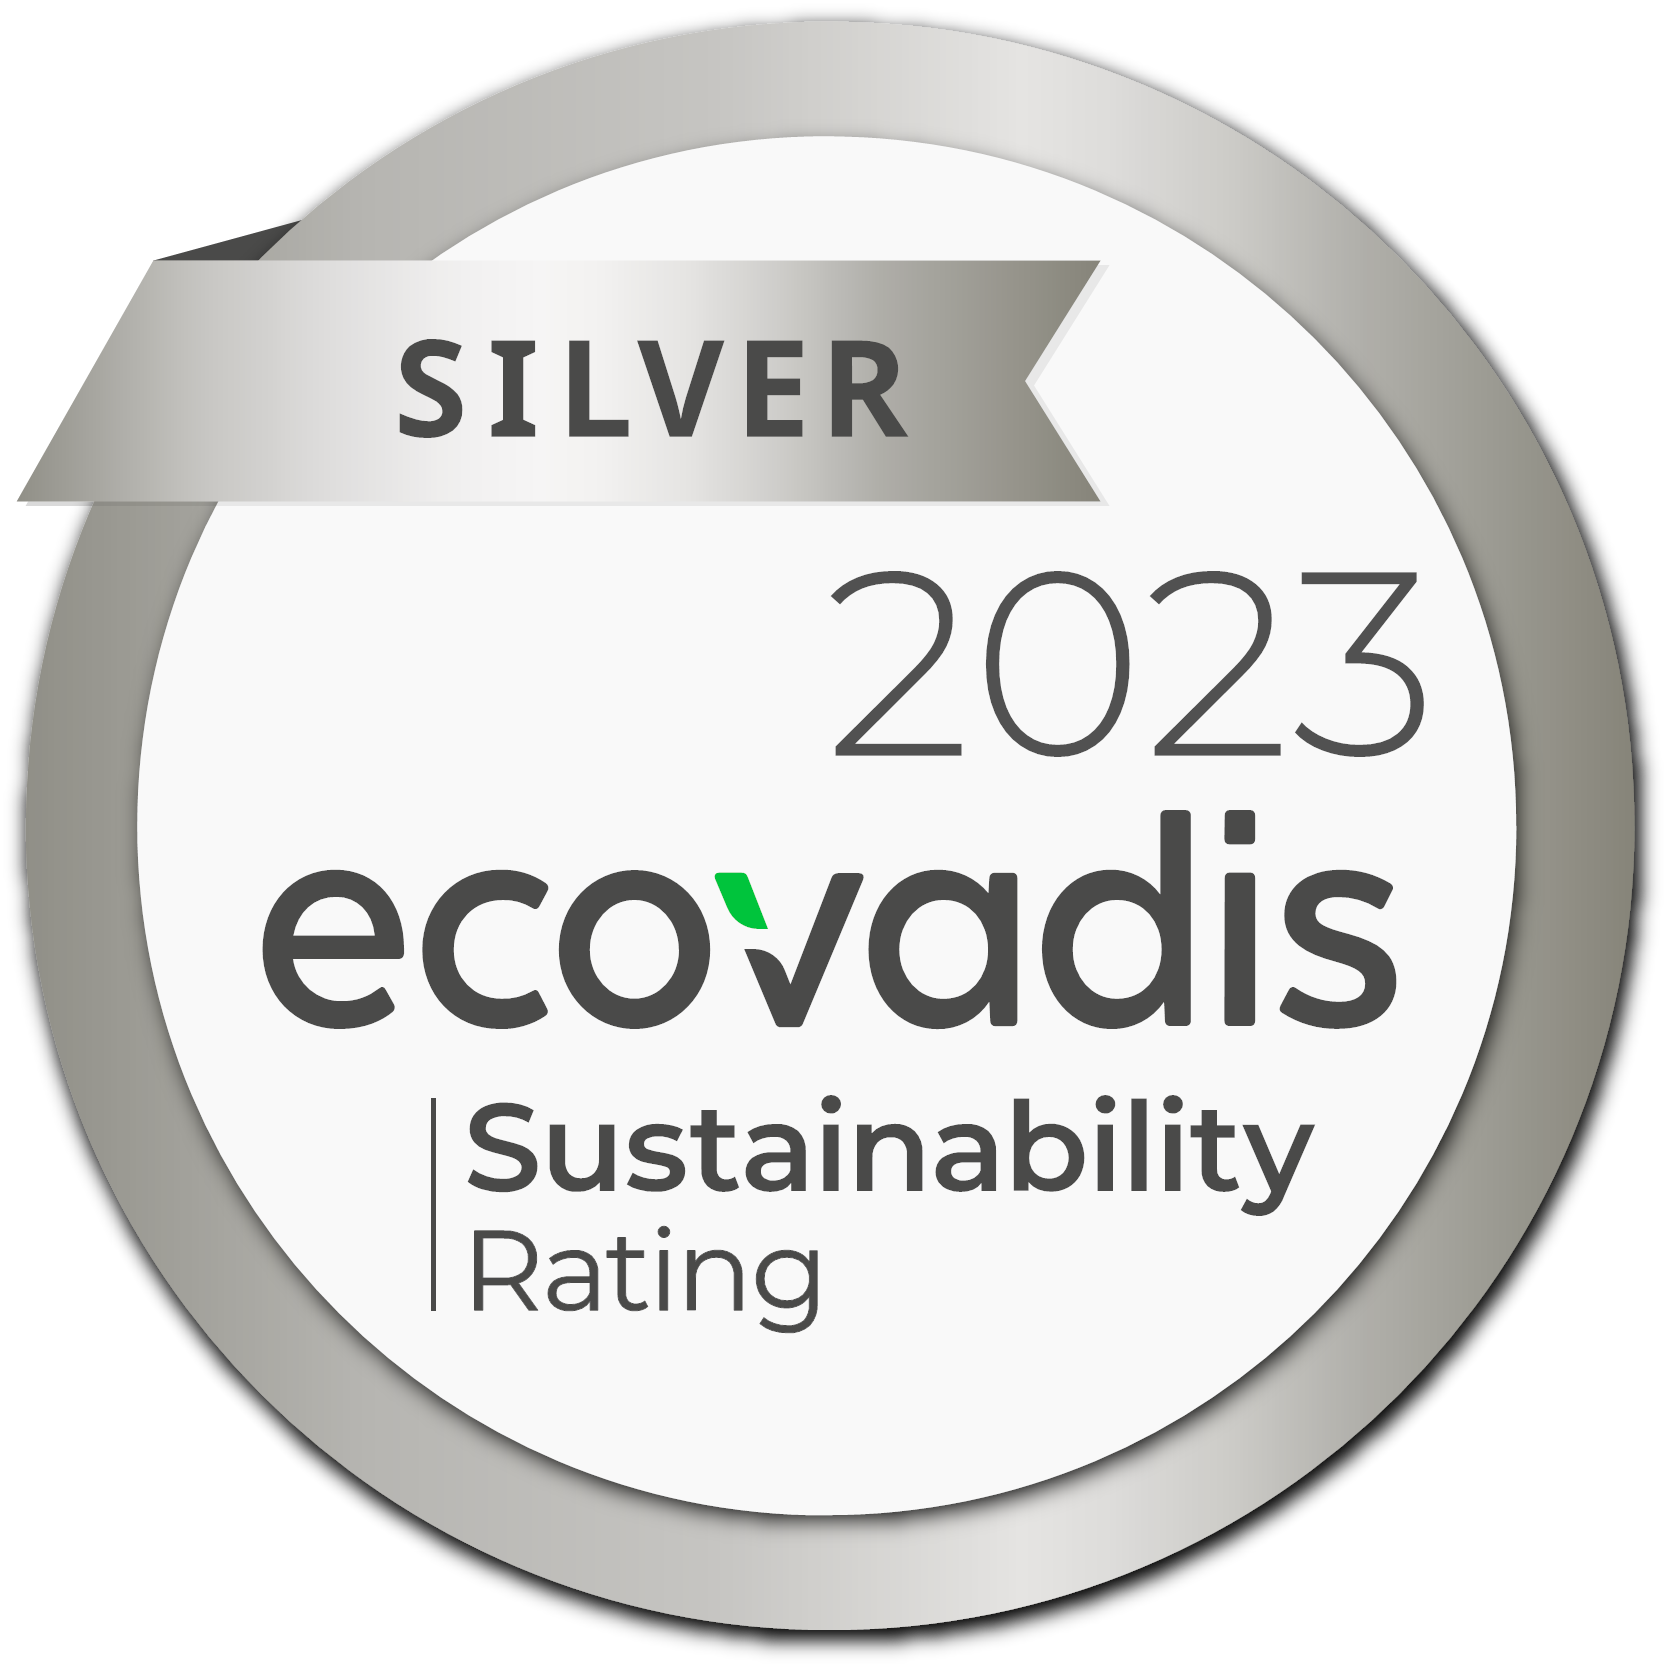 Silver 2023 ecovadis Sustainability Rating